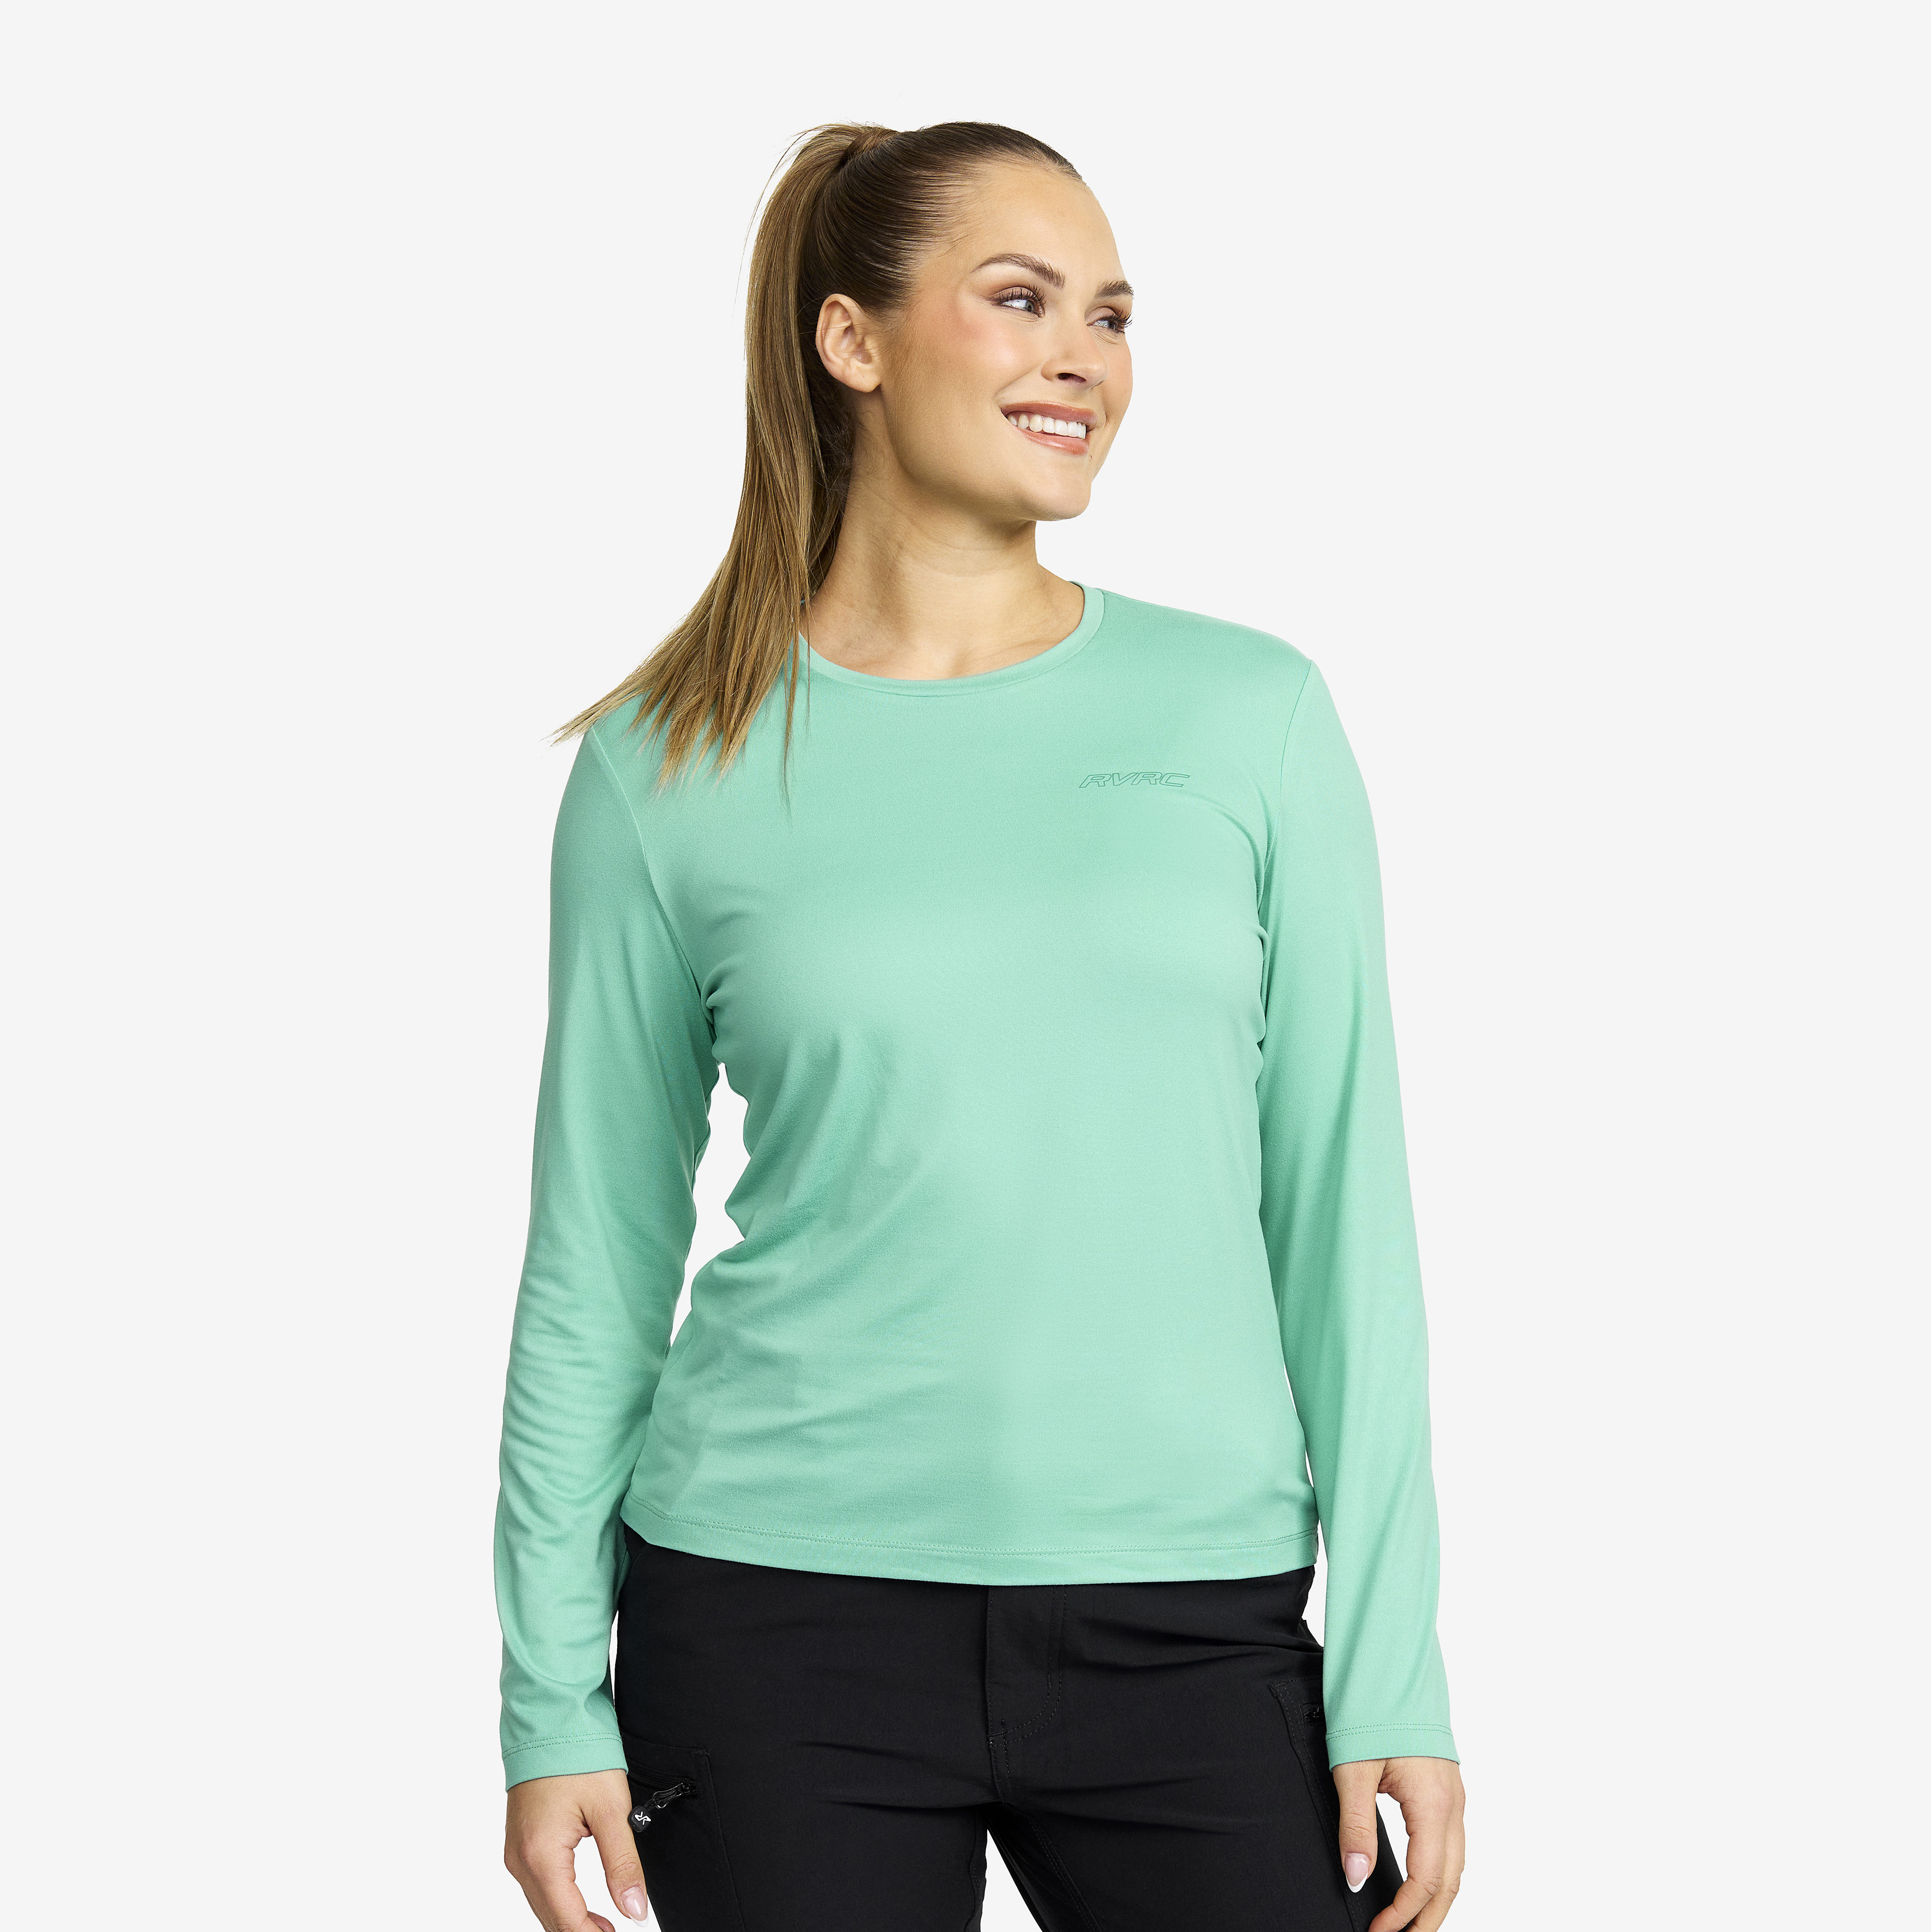 Mission Long-sleeved T-shirt Canton Femme